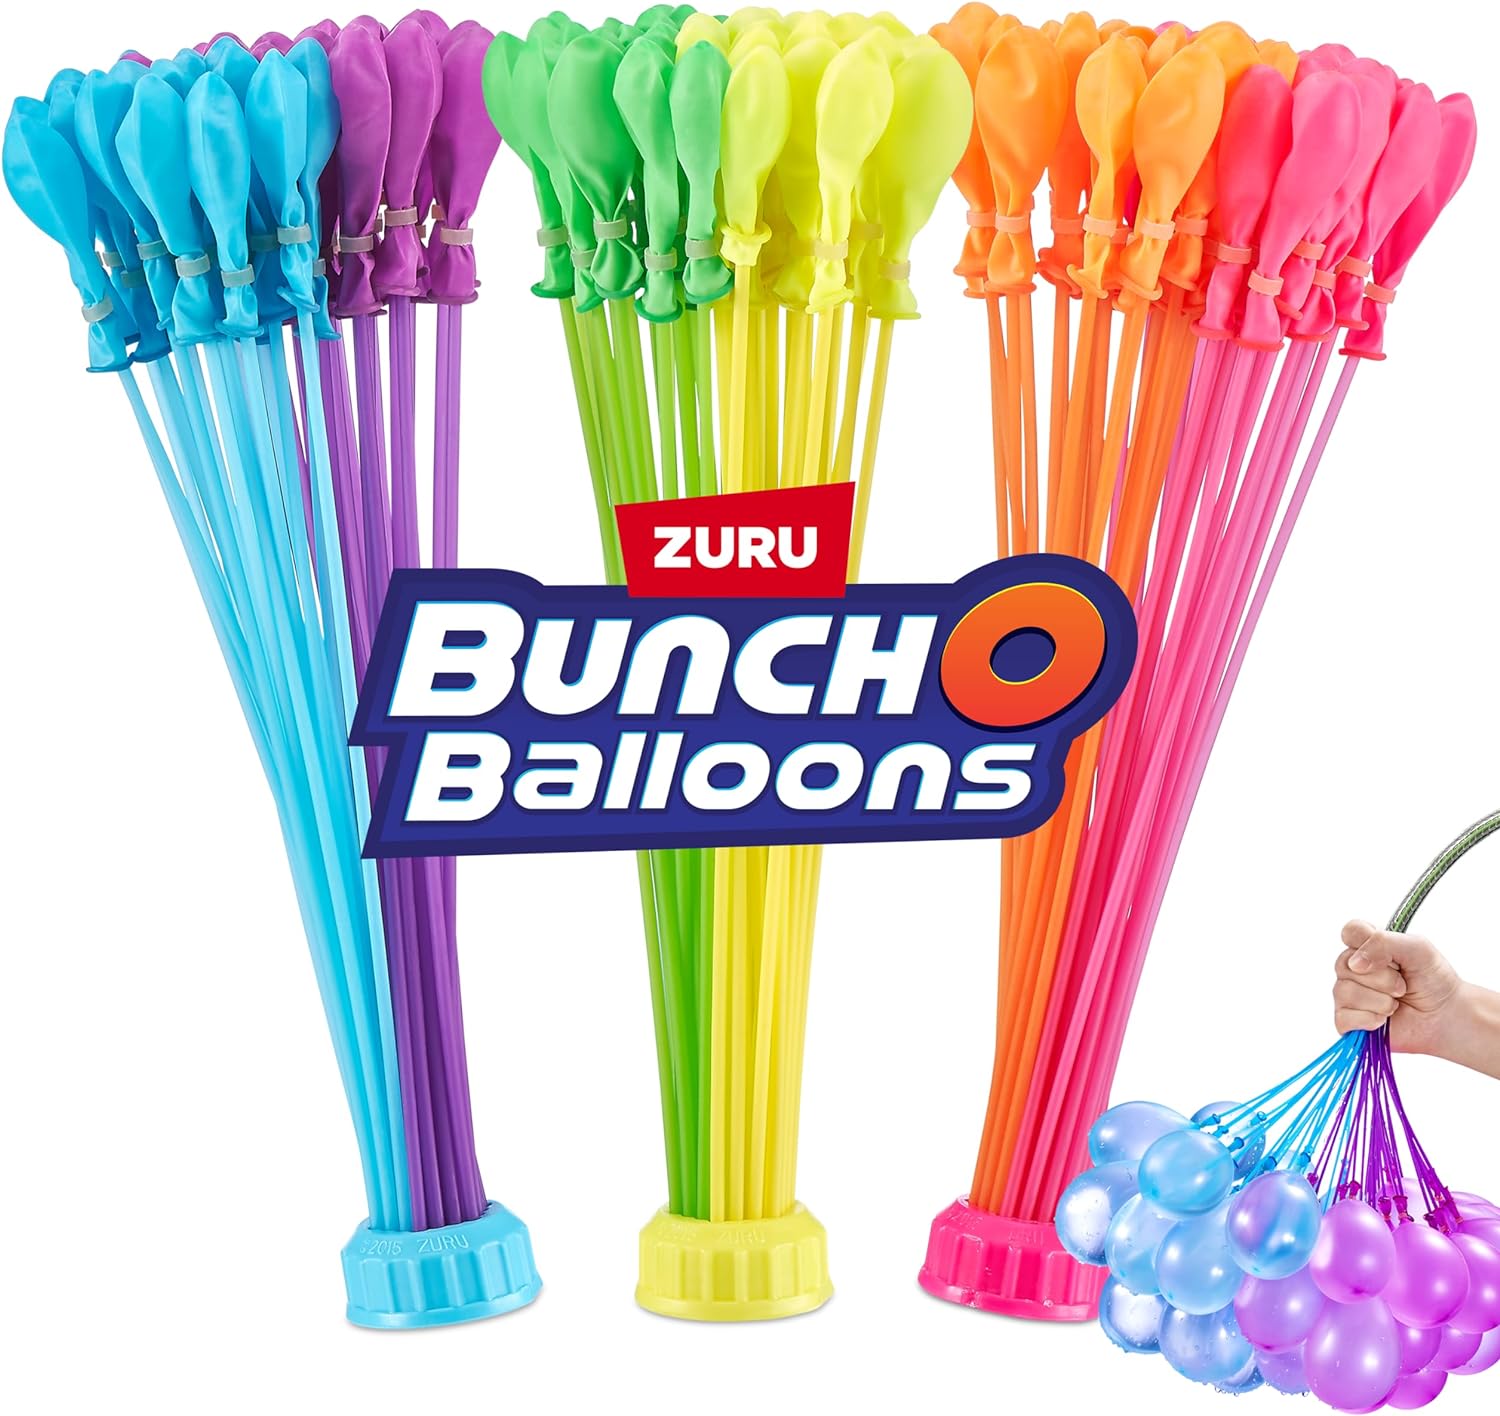 Bunch O Balloons Tropical Party (3 Packs, 100+ Rapid-Filling Self-Sealing Tropical Colored Water Balloons)